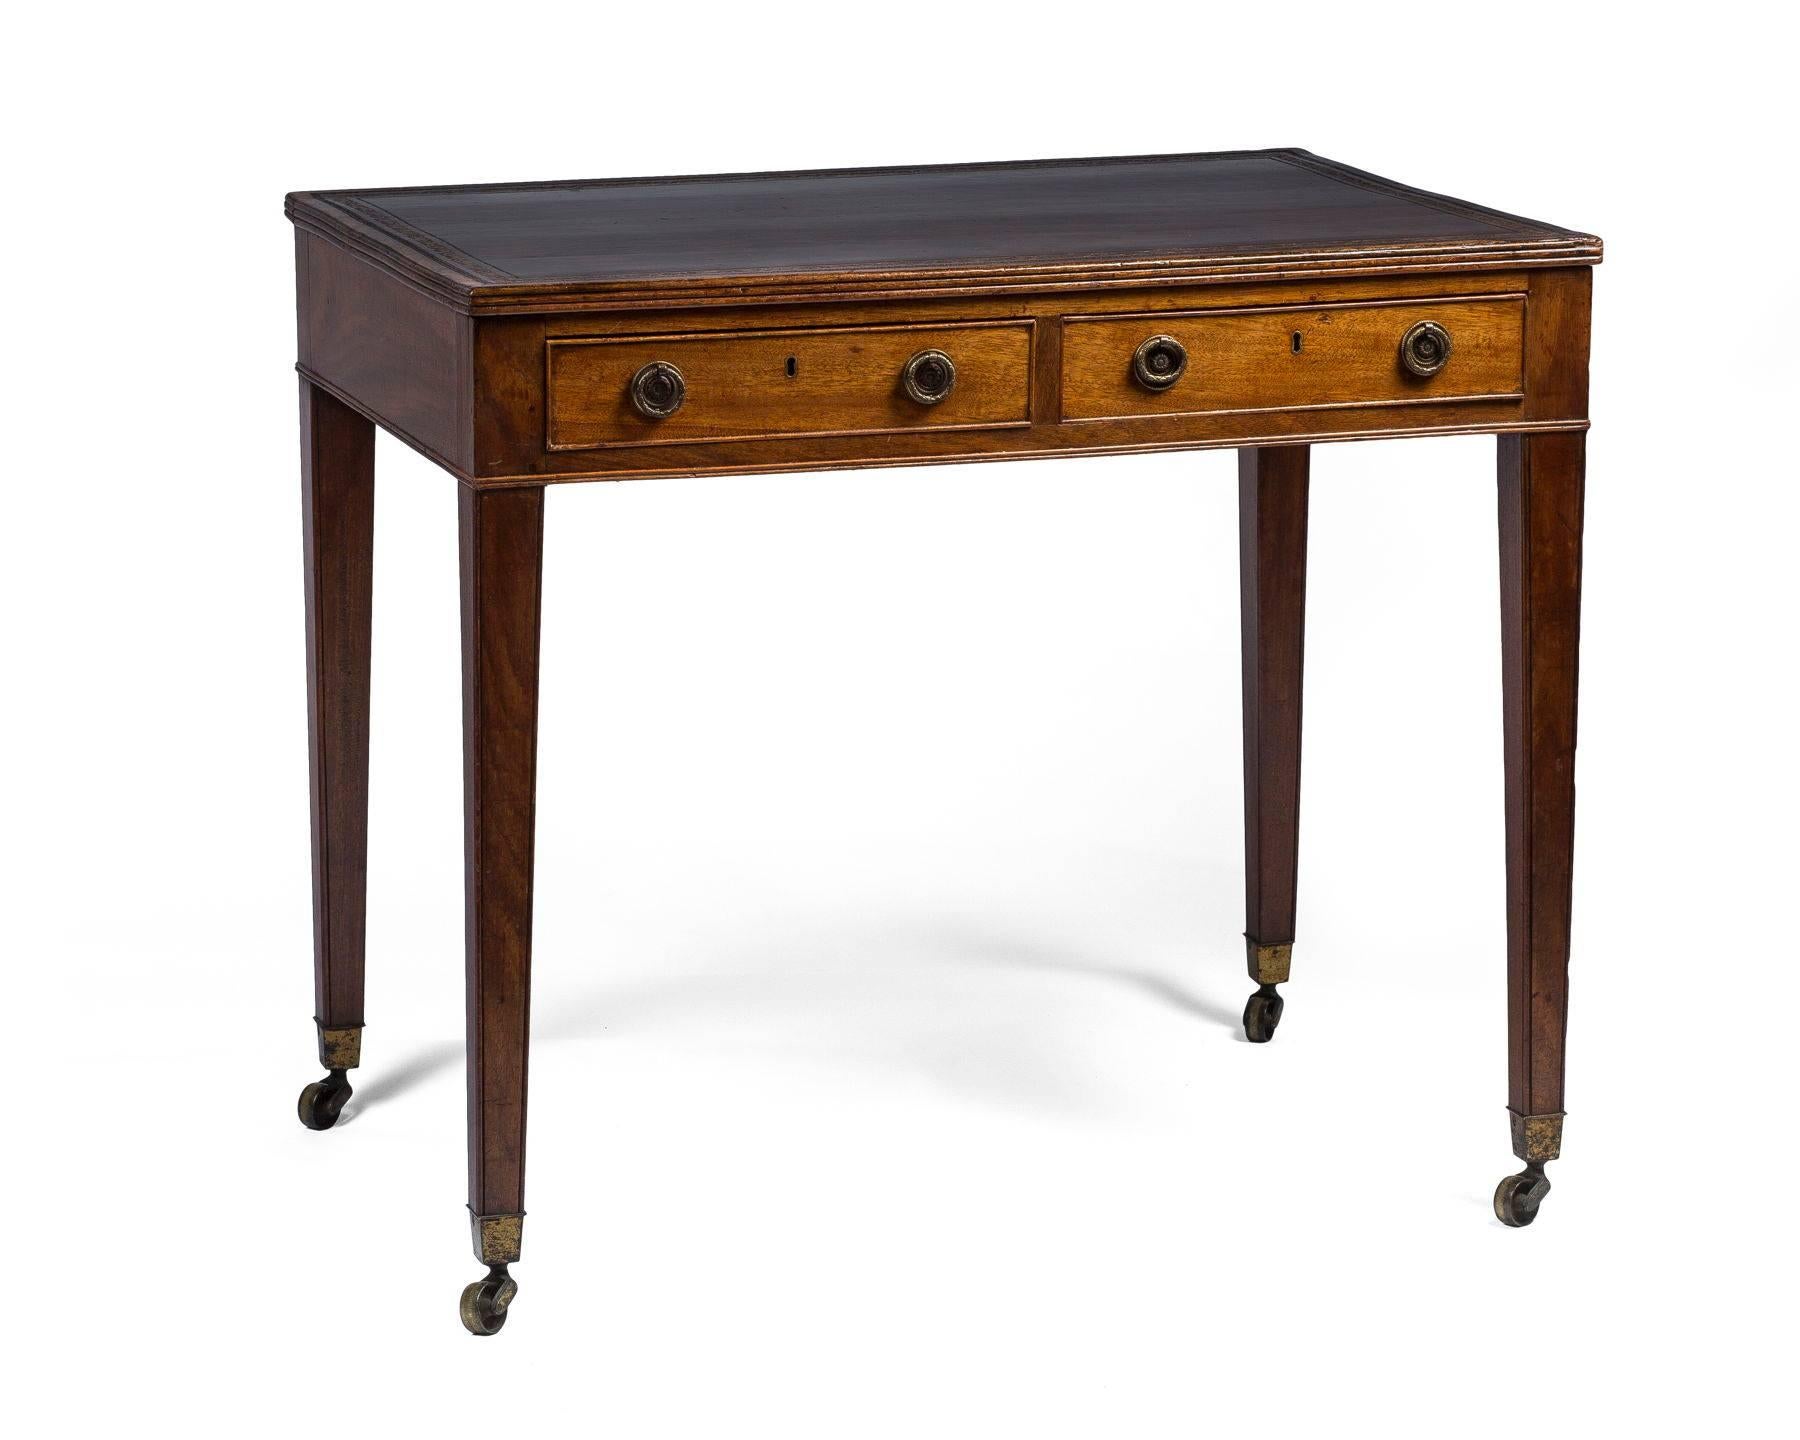 The rectangular top inset with a tooled leather, above two short drawers opposed by two dummy drawers, on square tapering legs ending in casters, one drawer bearing a paper label for Stair & Co., 59 East 57th Street New York, resellers of 